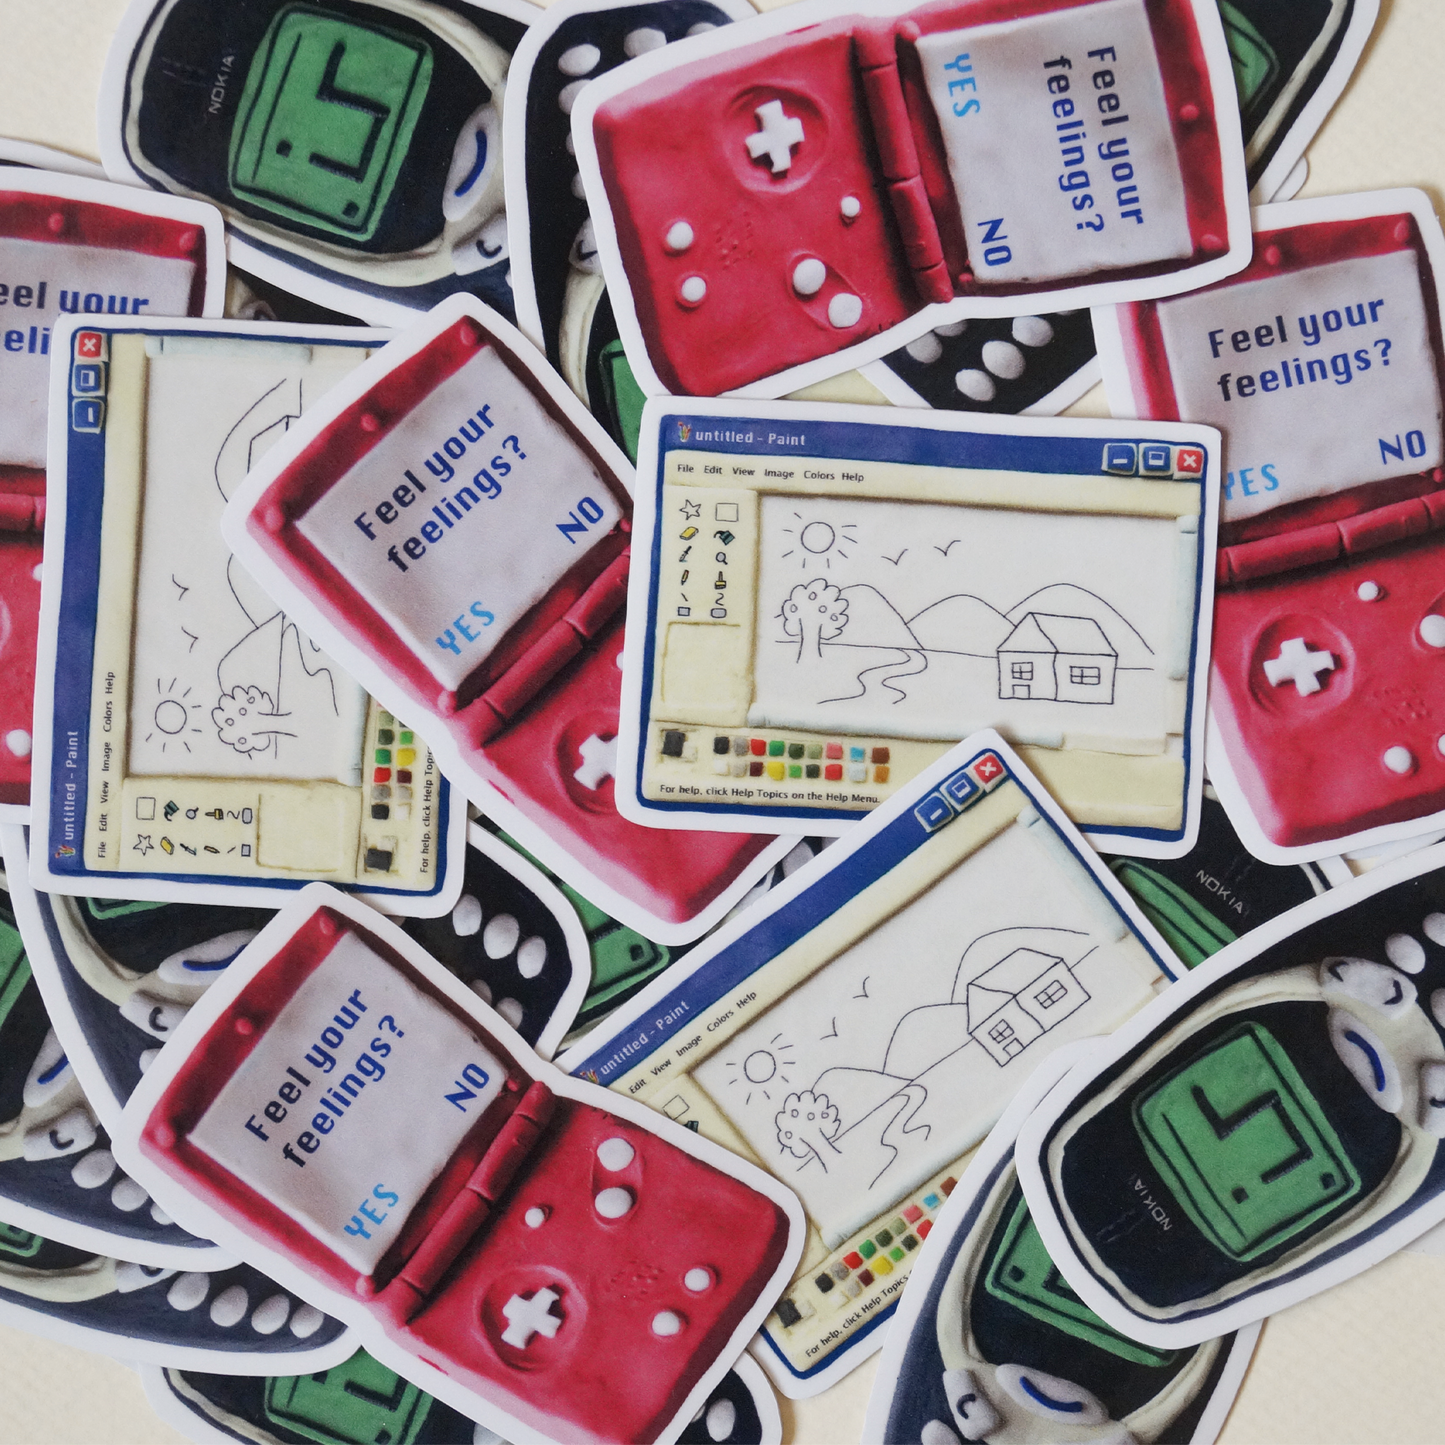 residue-free vinyl stickers for laptops inspired by 2000s tech, MS Paint, Nokia snake game and gameboys, featuring clay illustrations